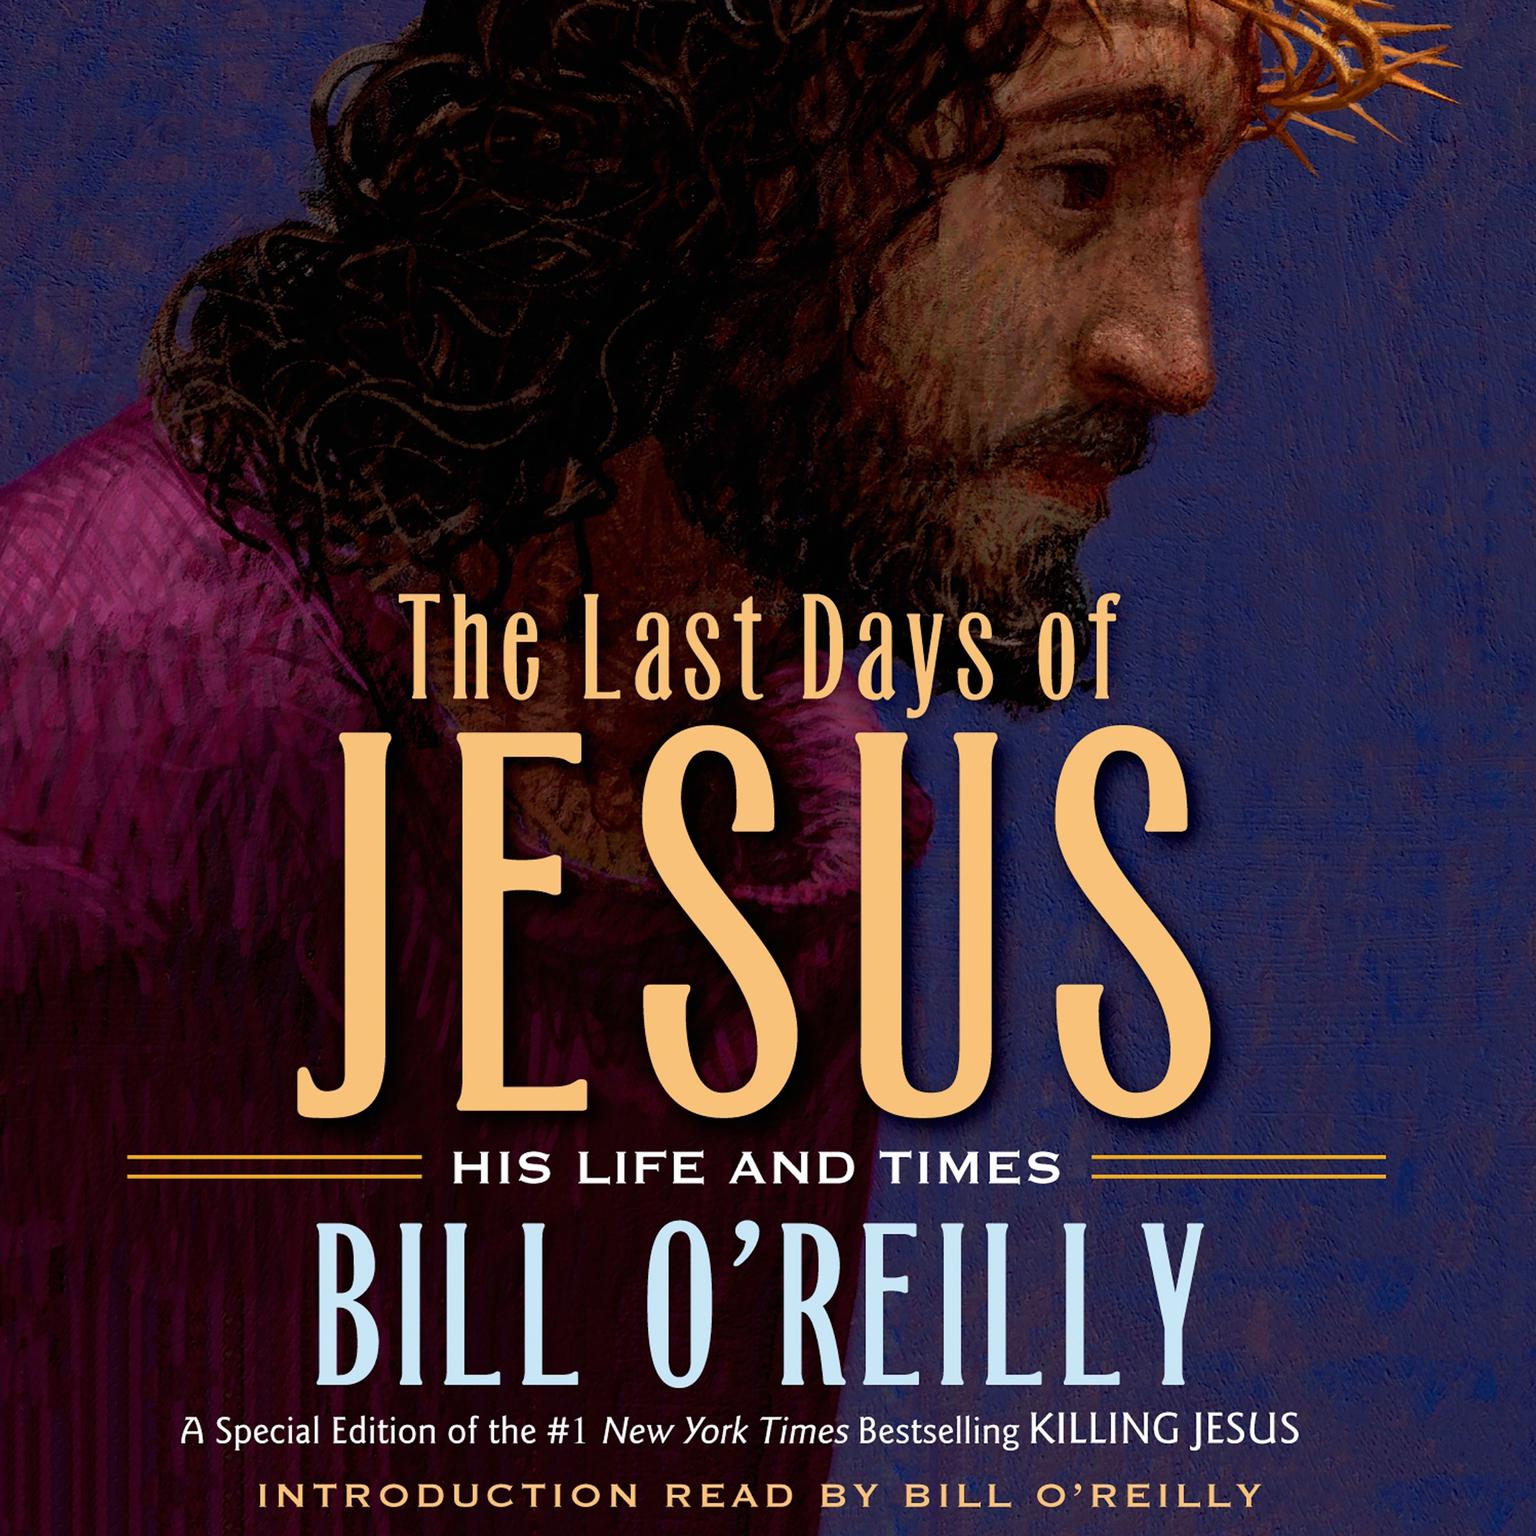 The Last Days of Jesus: His Life and Times Audiobook, by Bill O'Reilly